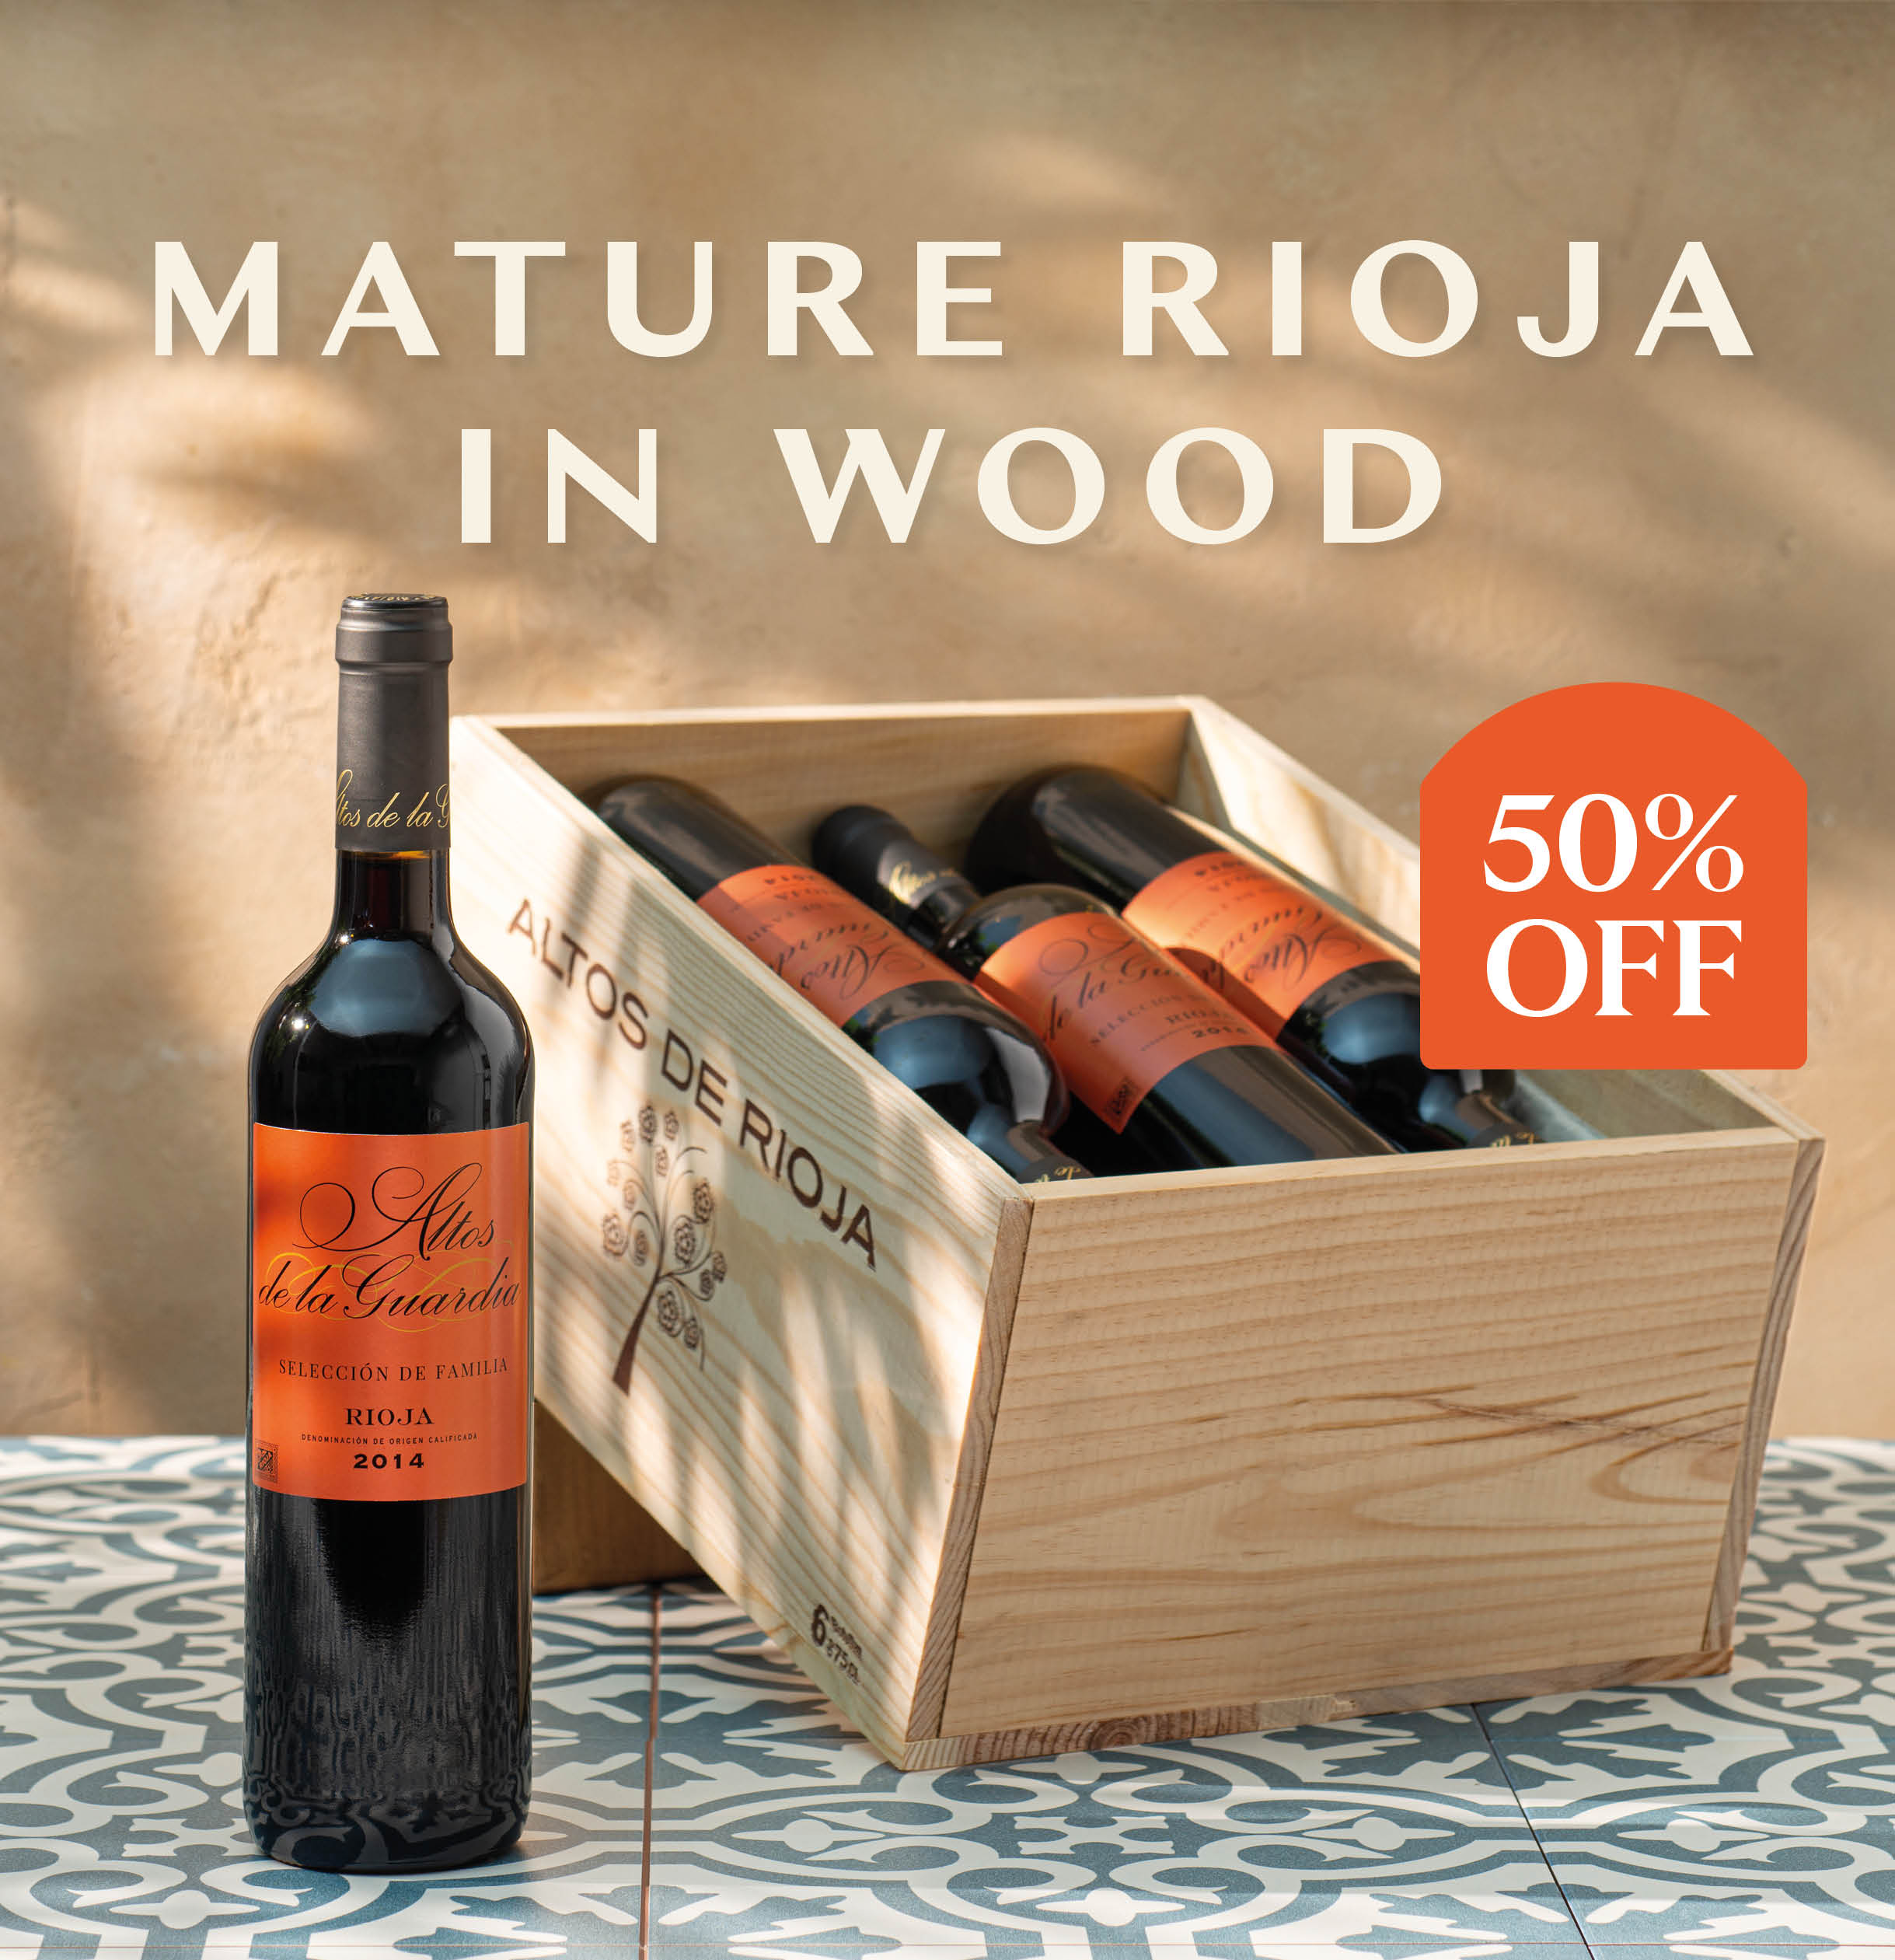 Mature Rioja in wood - SAVE over 50%